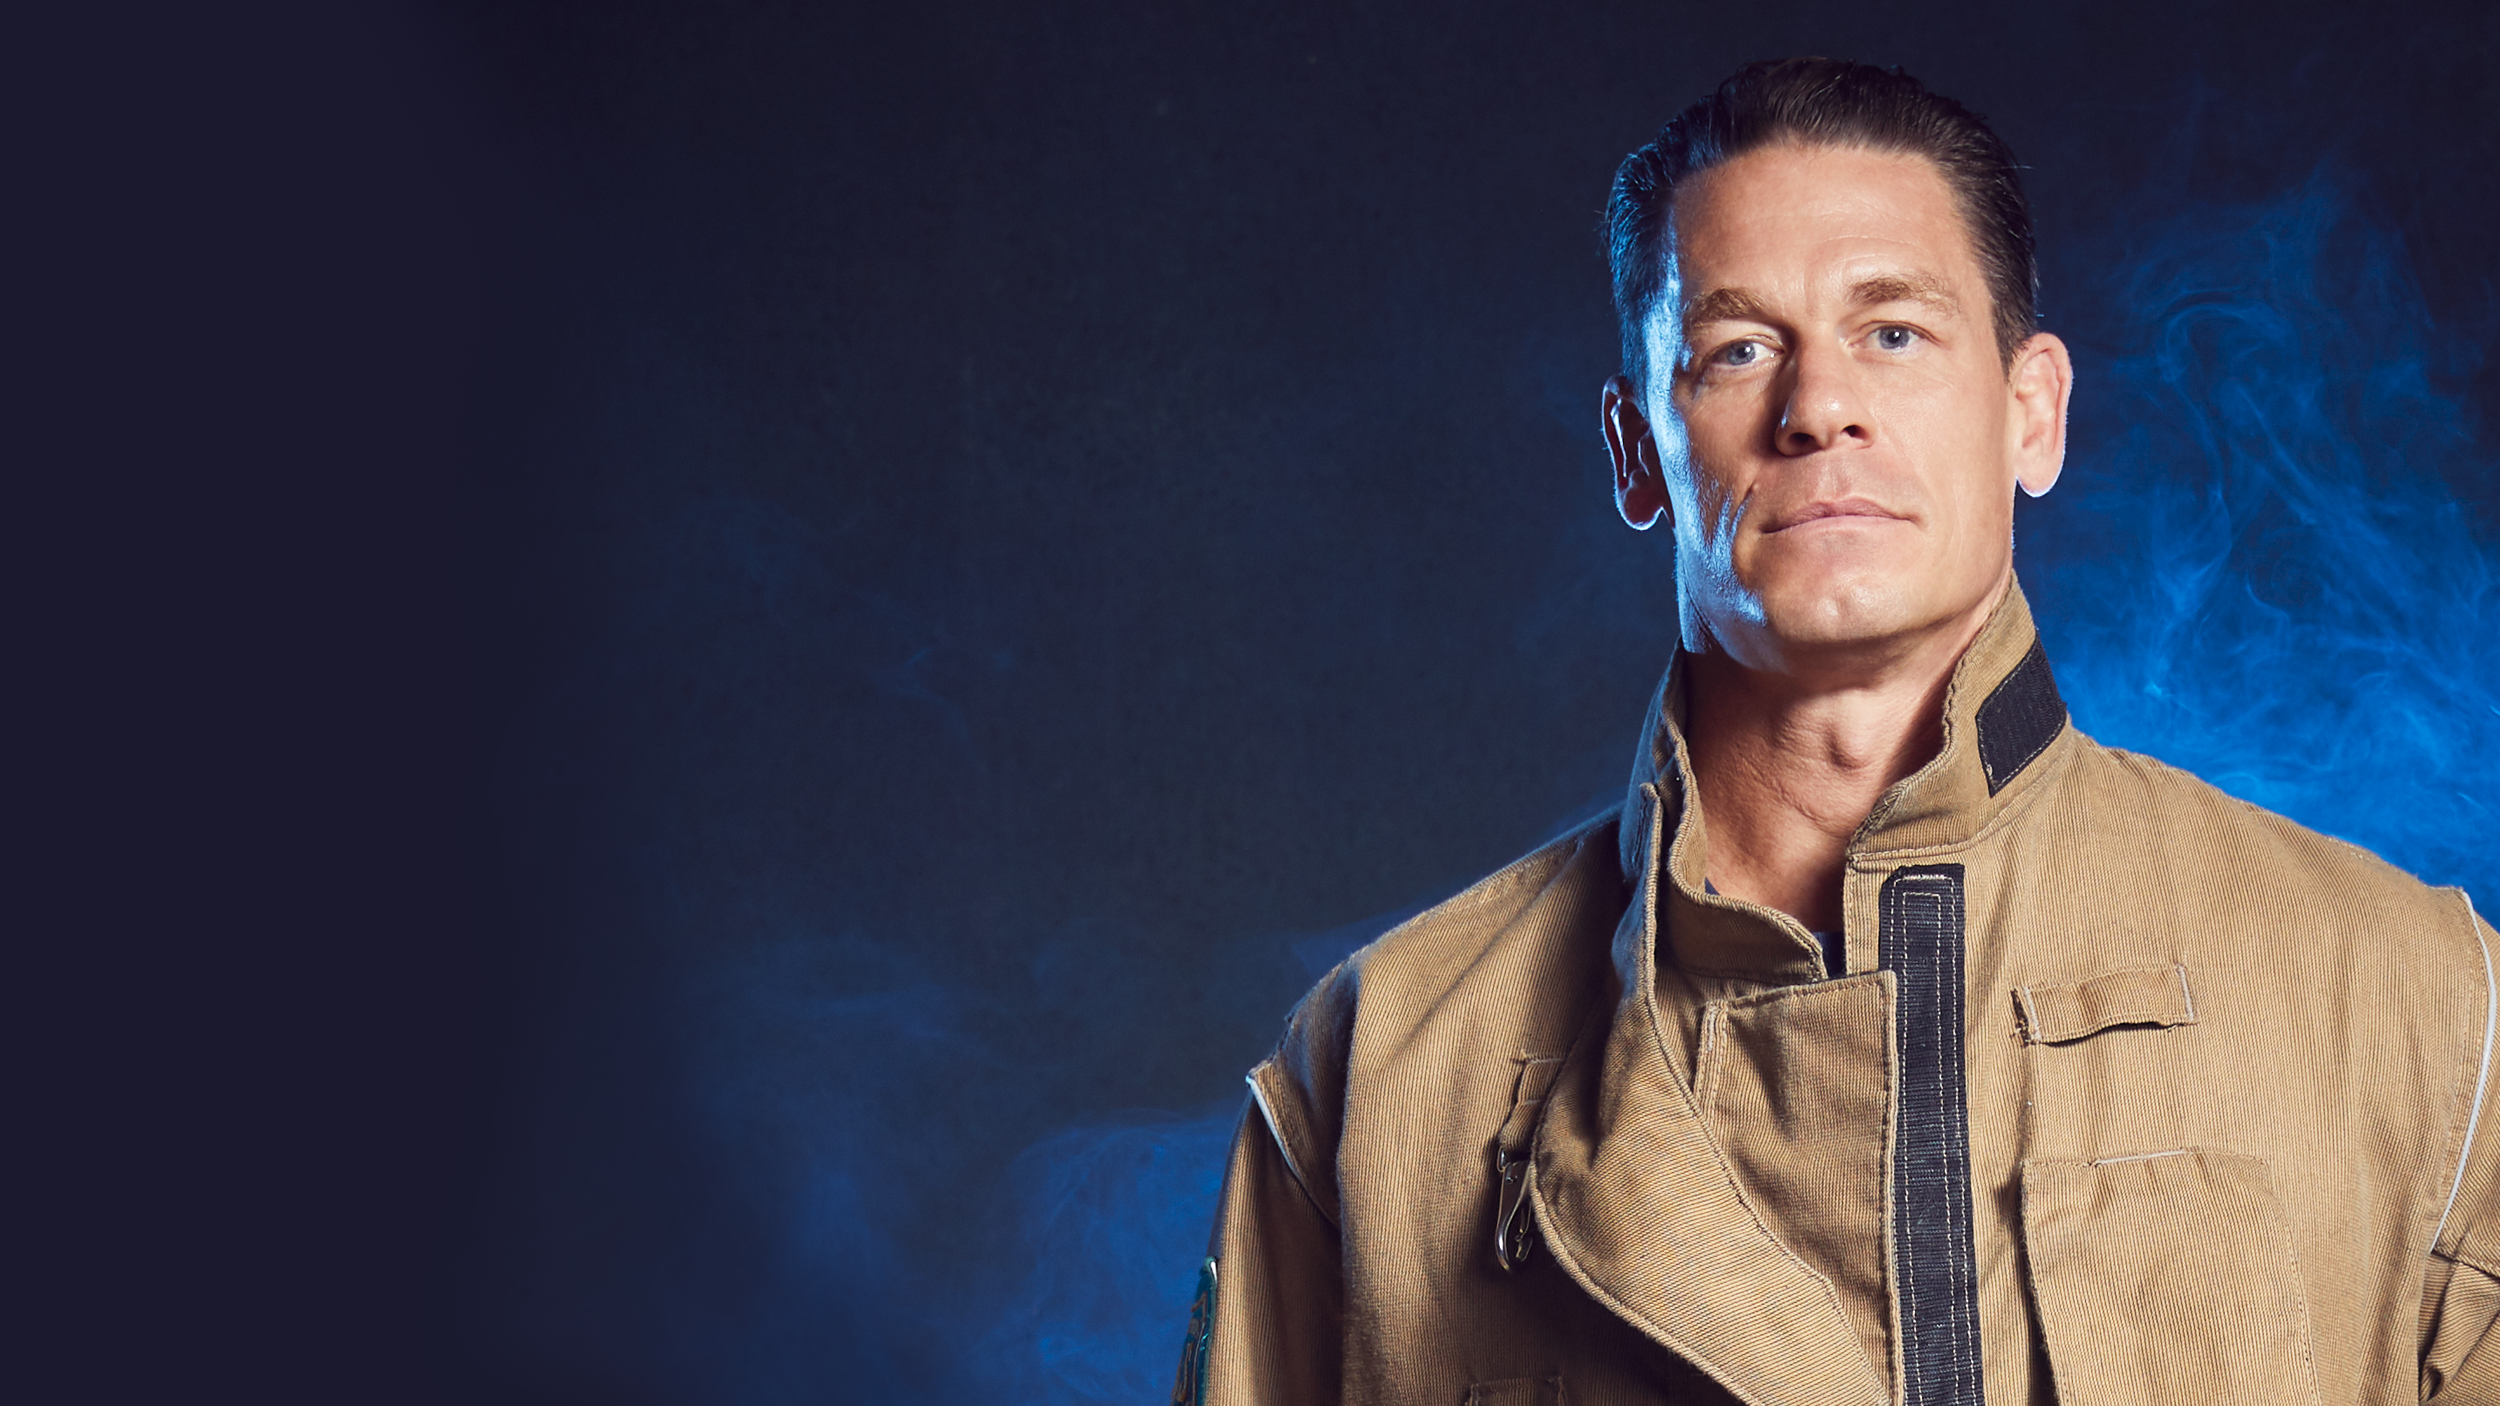 John Cena On Wwe His New Movie Playing With Fire And Views Toward Parenting After Nikki Bella Split